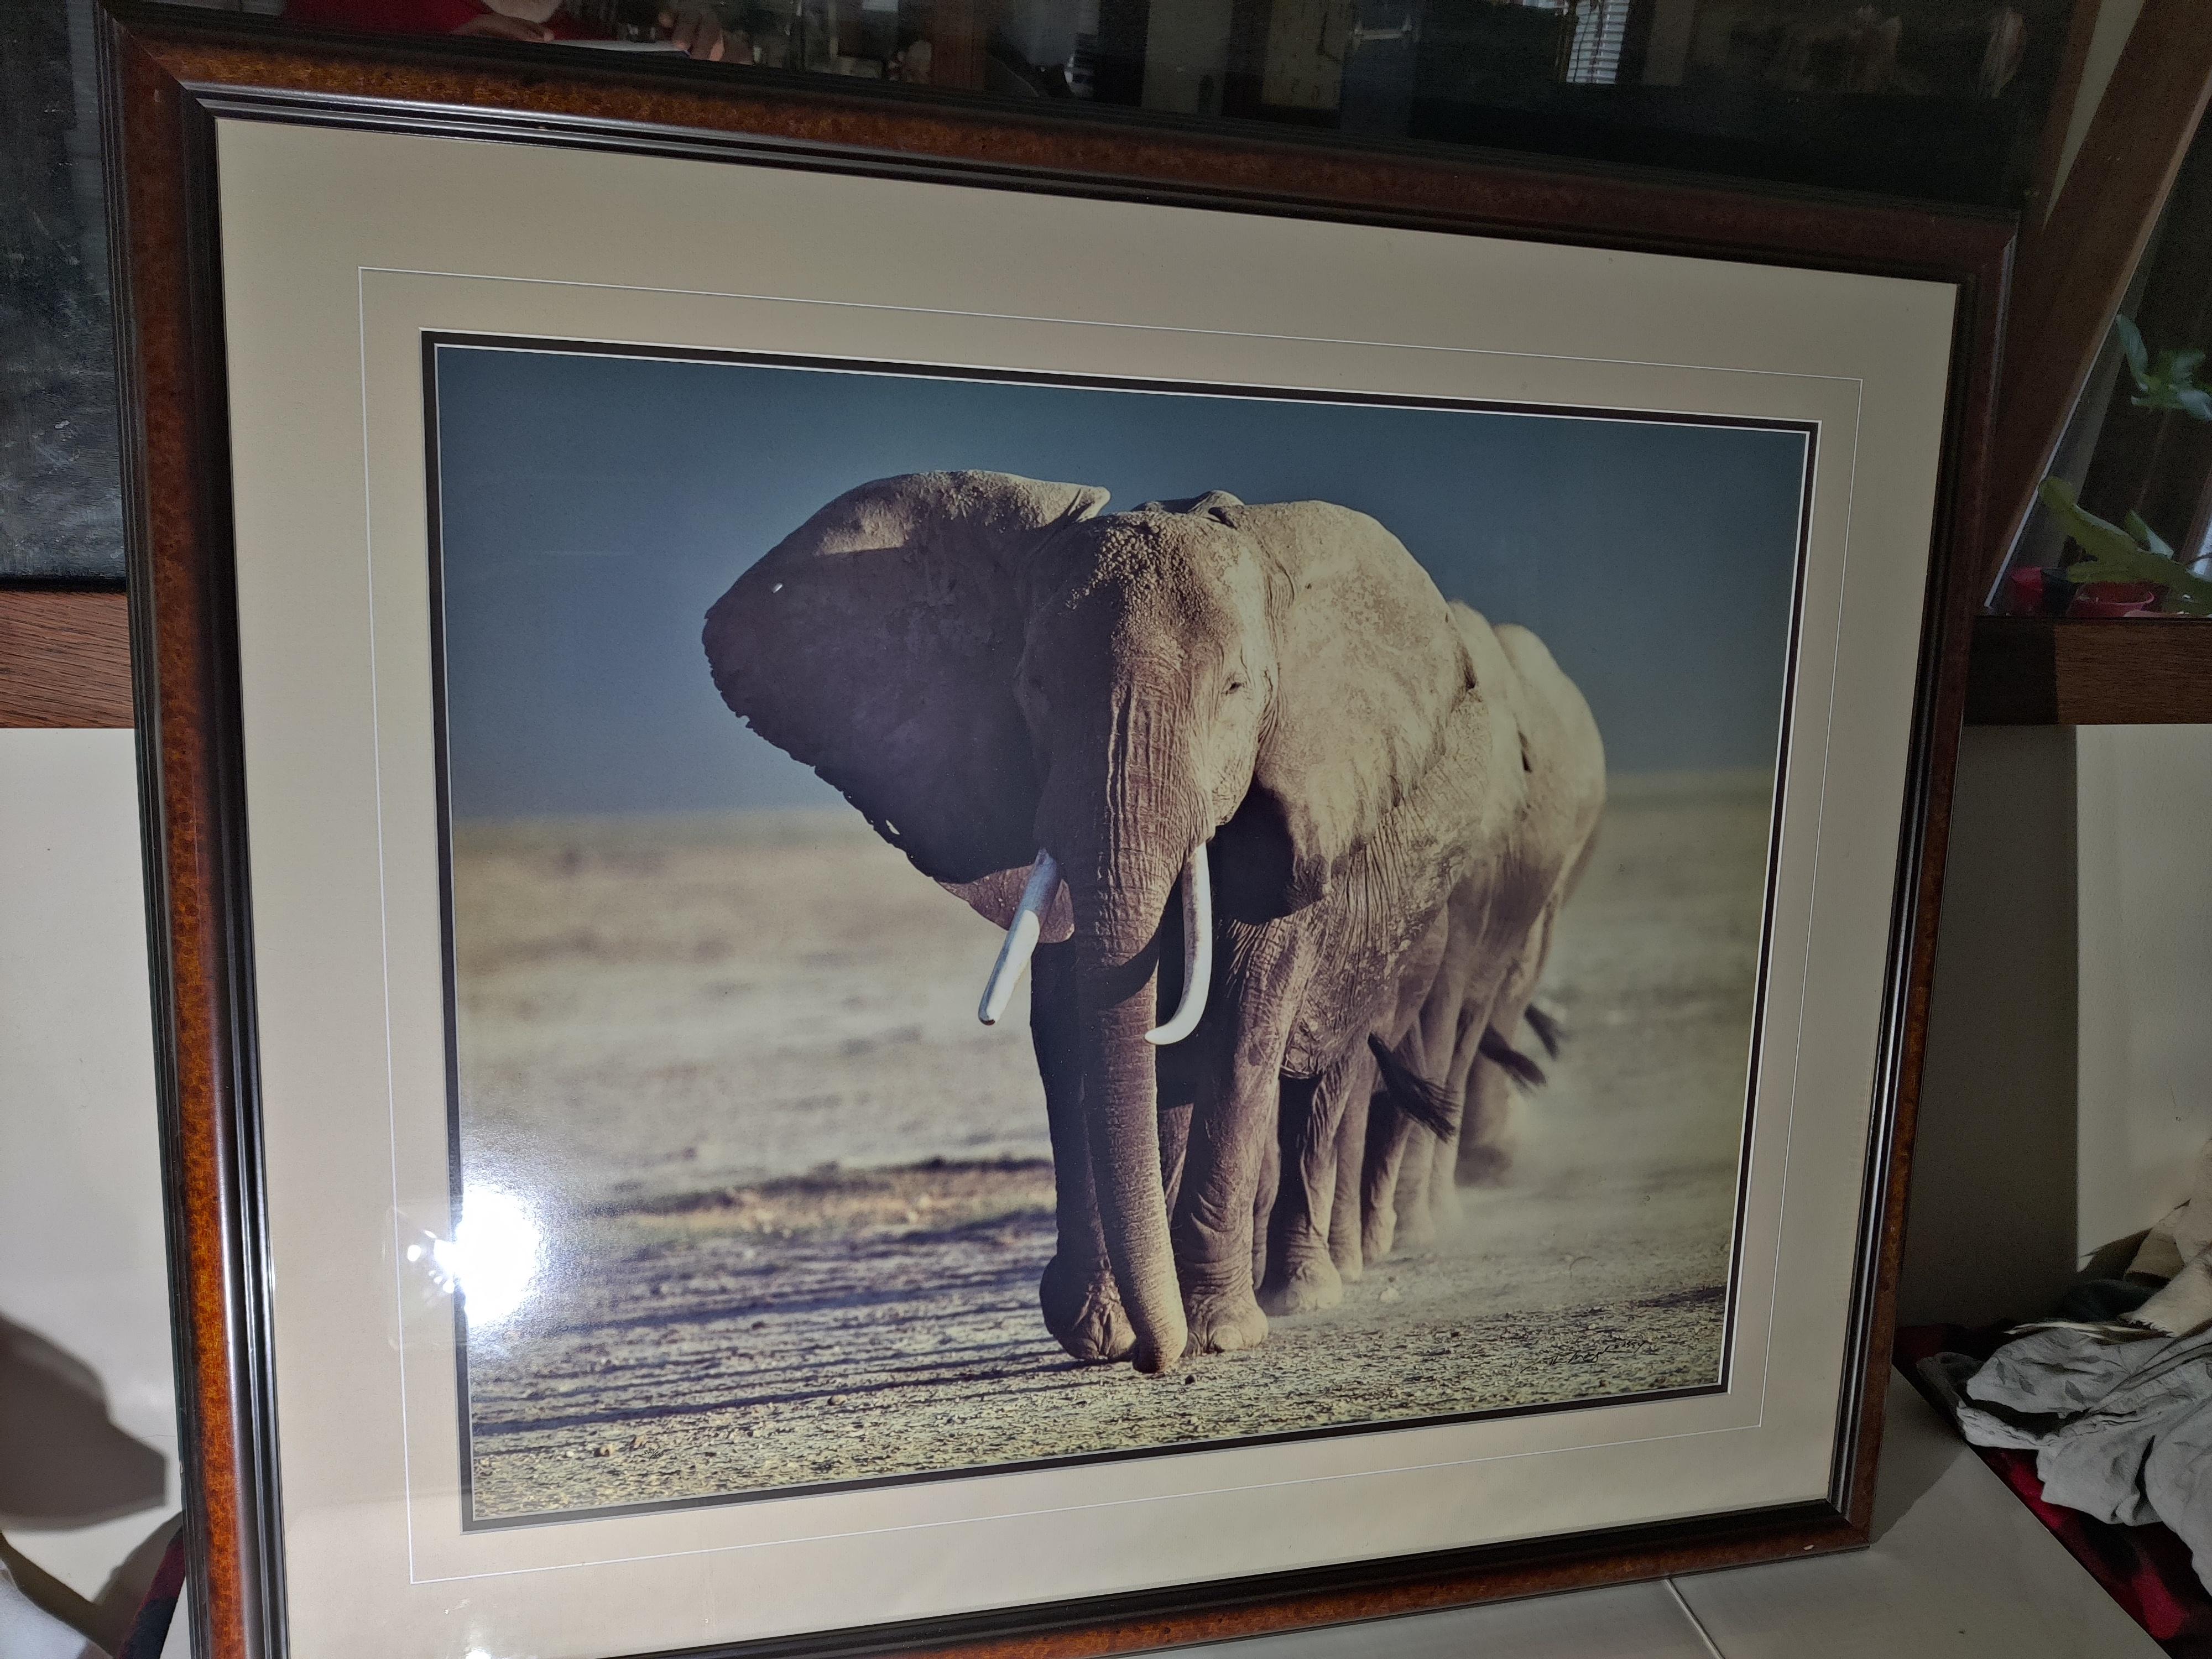 Artist Signed and Numbered Photo of  Elephants Crossing Kenya's Amboseli Crossing National Park
Thomas D. Mangelsen Artist, signed 340/950, limited, out of print photo 
Wood framed, double mat
Image dimensions H 23.75 x W 29.5
Artist information on